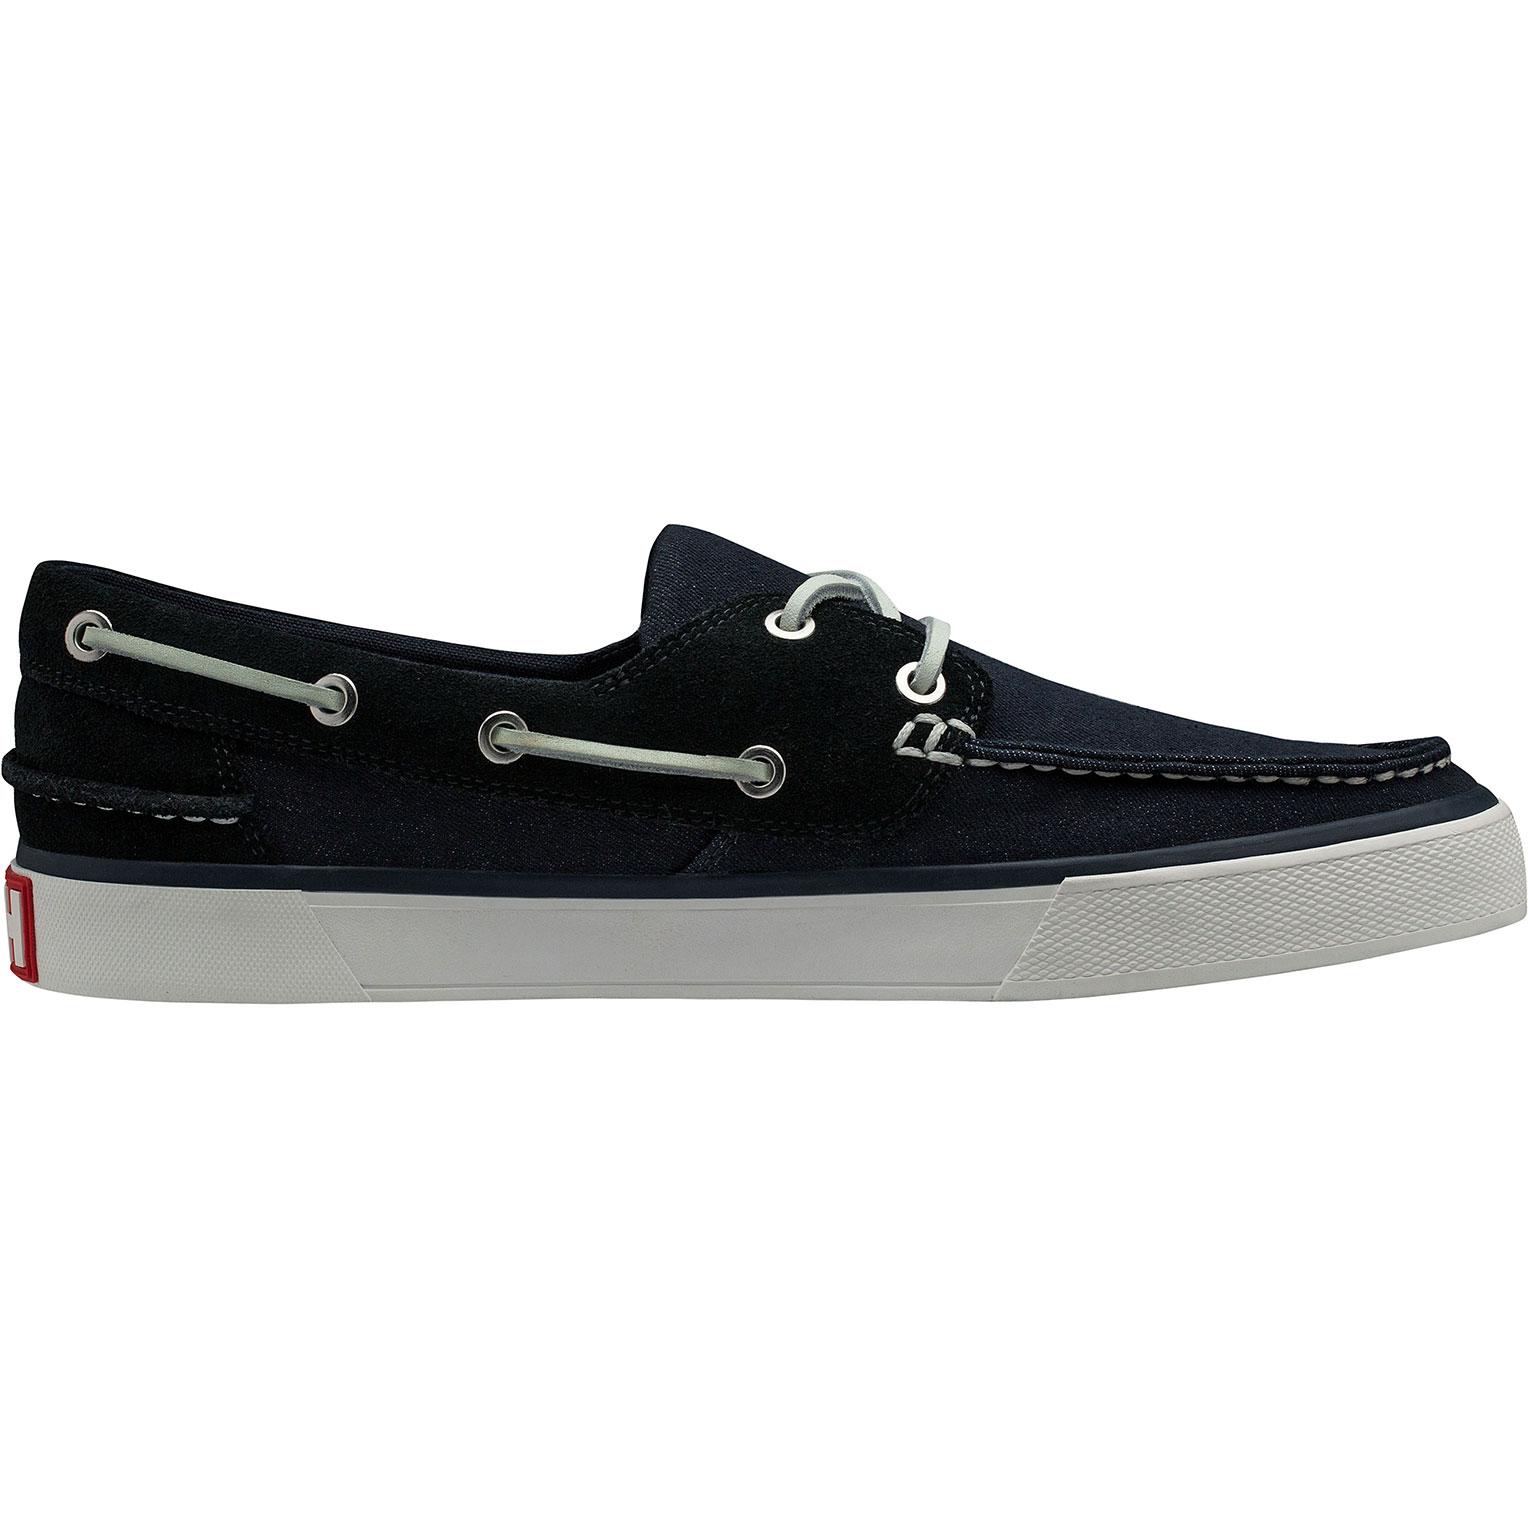 Helly Hansen Suede Sandhaven Boat Shoes in Blue for Men - Lyst